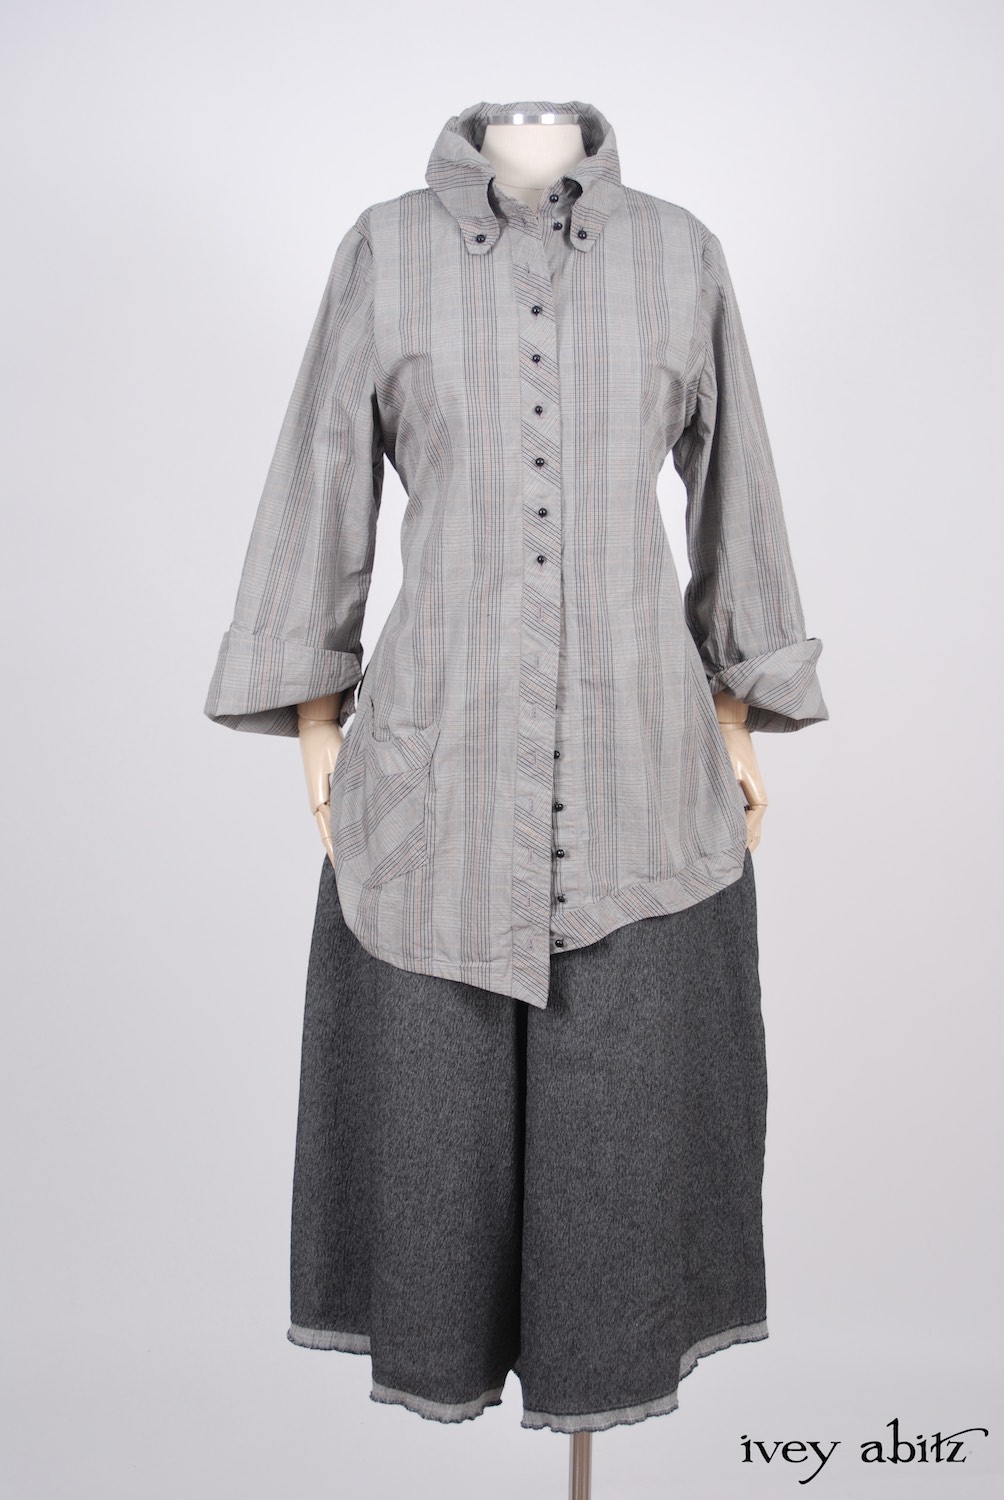 Ivey Abitz - Highlands Shirt in Sparrow Grey Plaid Poplin  - Traipse Trousers in Blackbird Double Layered Weave